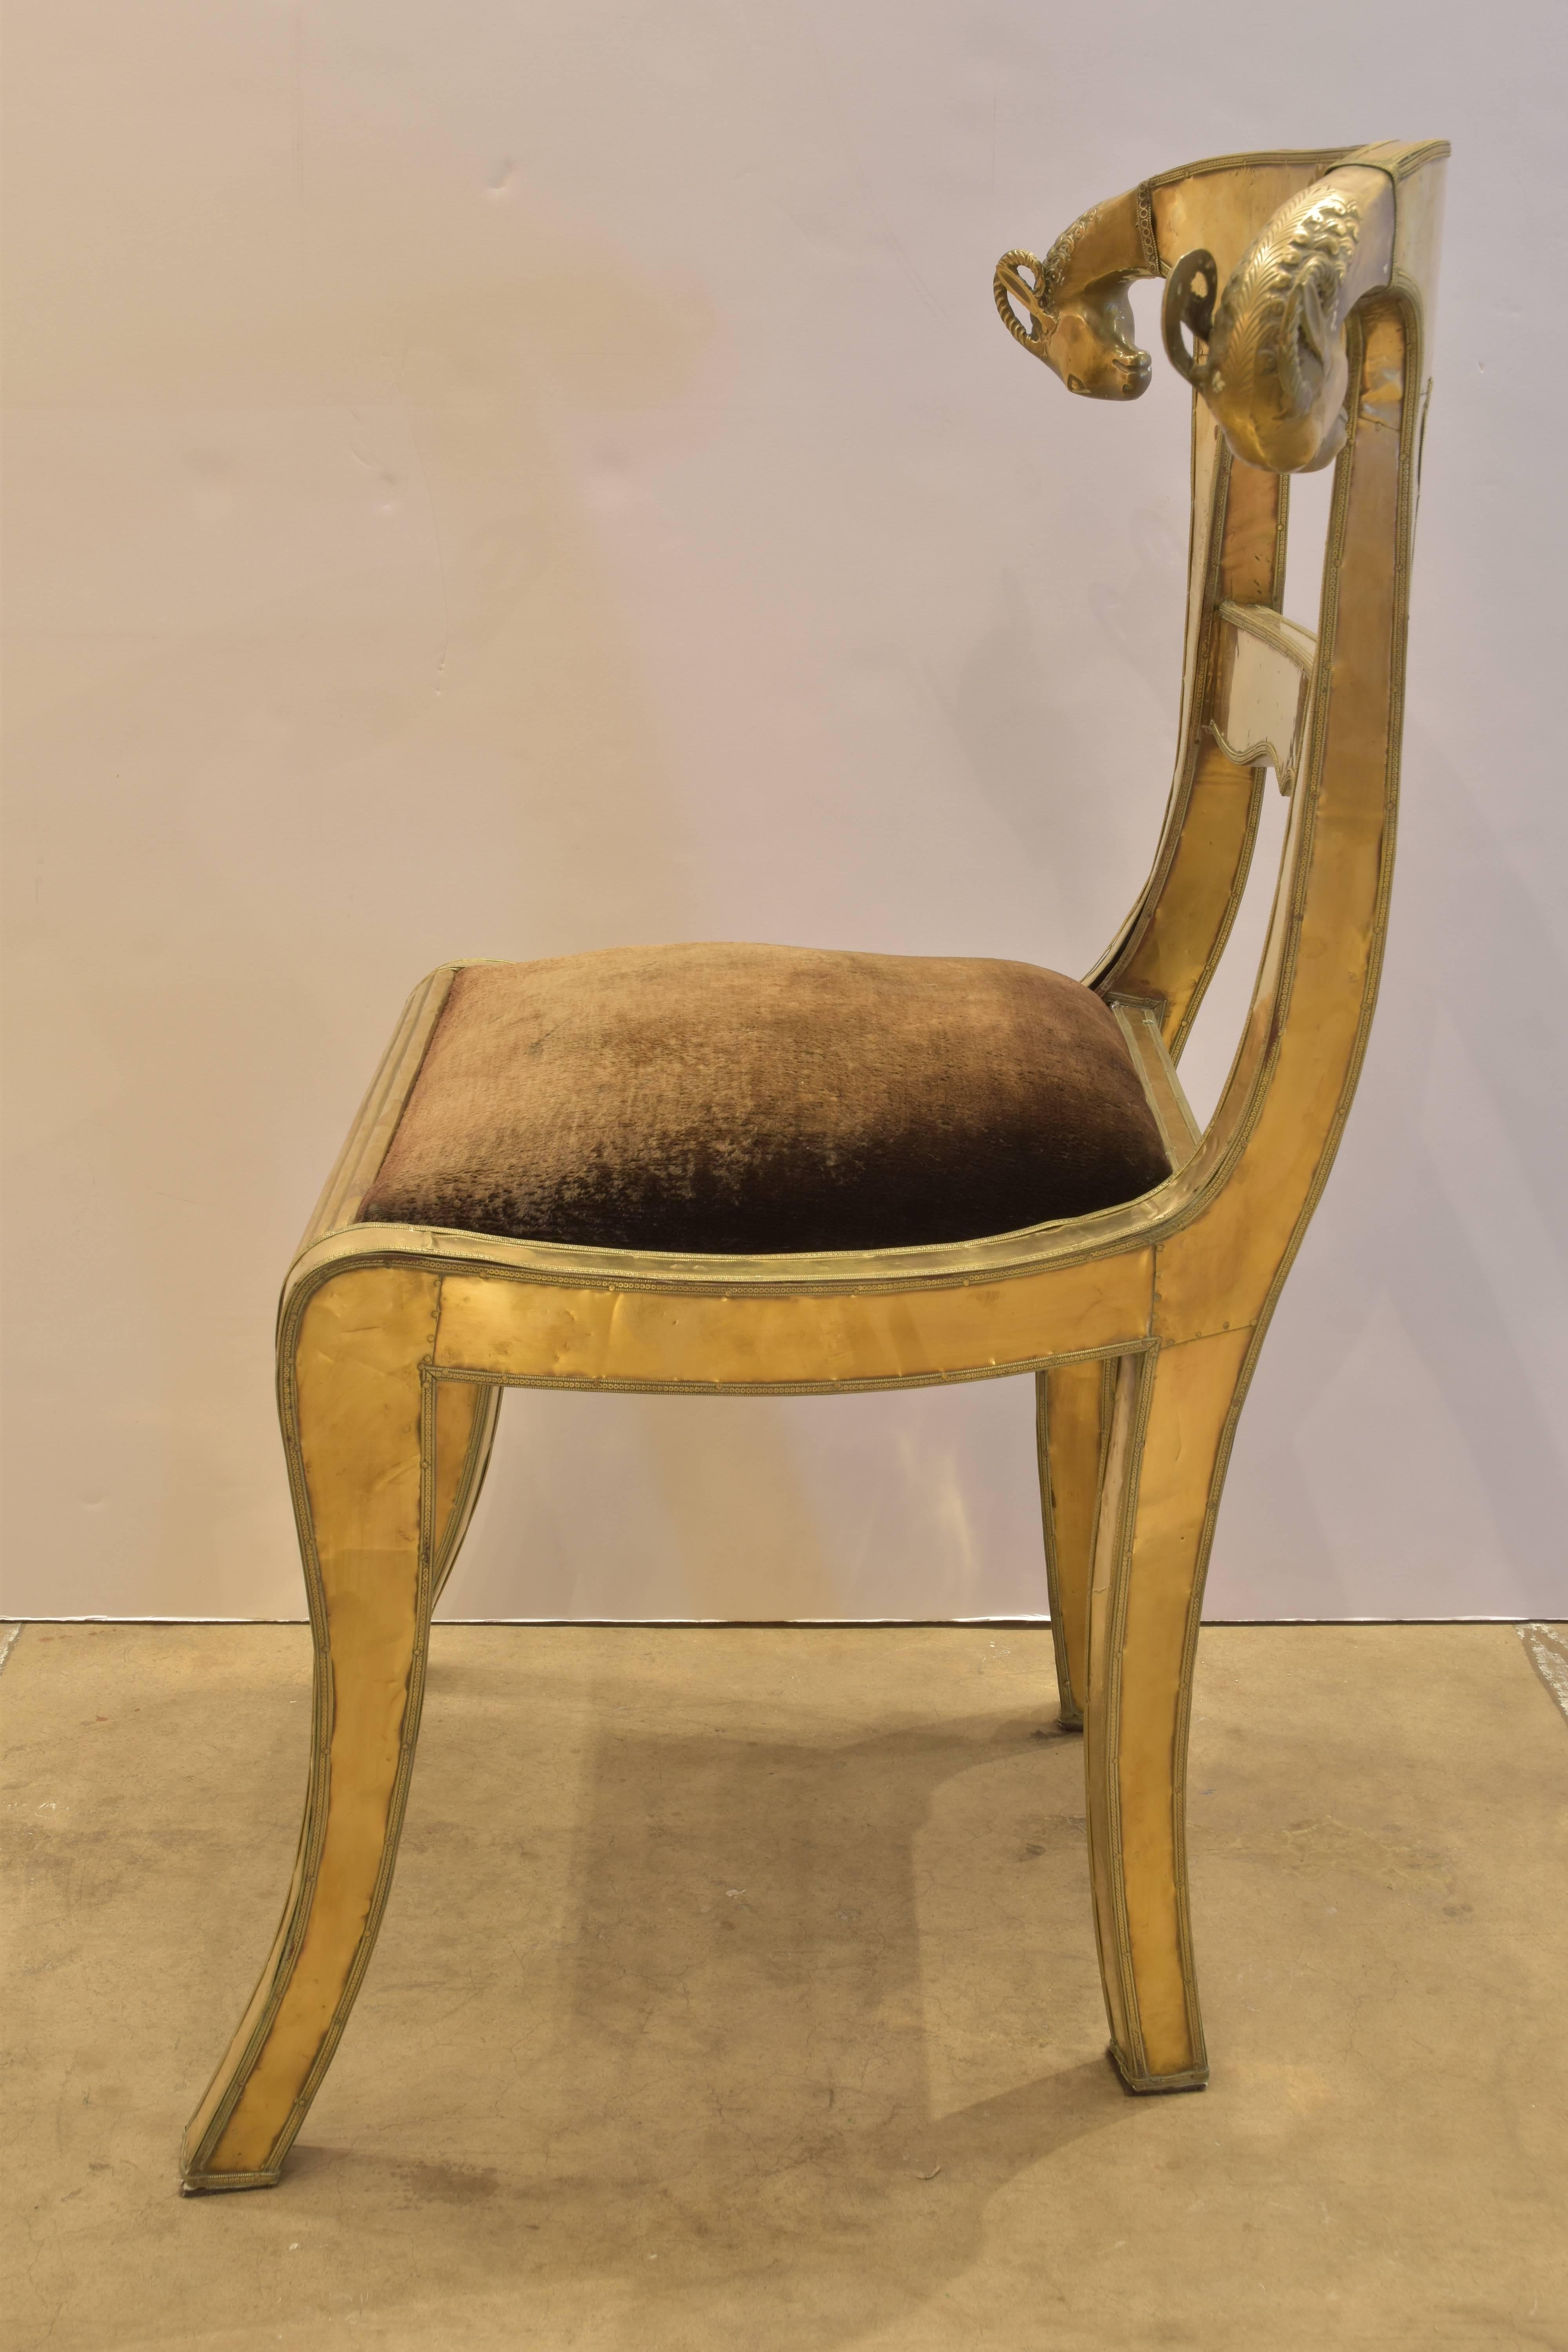 An exceptionally detailed unlacquered brass dowry chair with ram's head detail and gently tapered legs. A striking chair with vintage mohair upholstered seat.